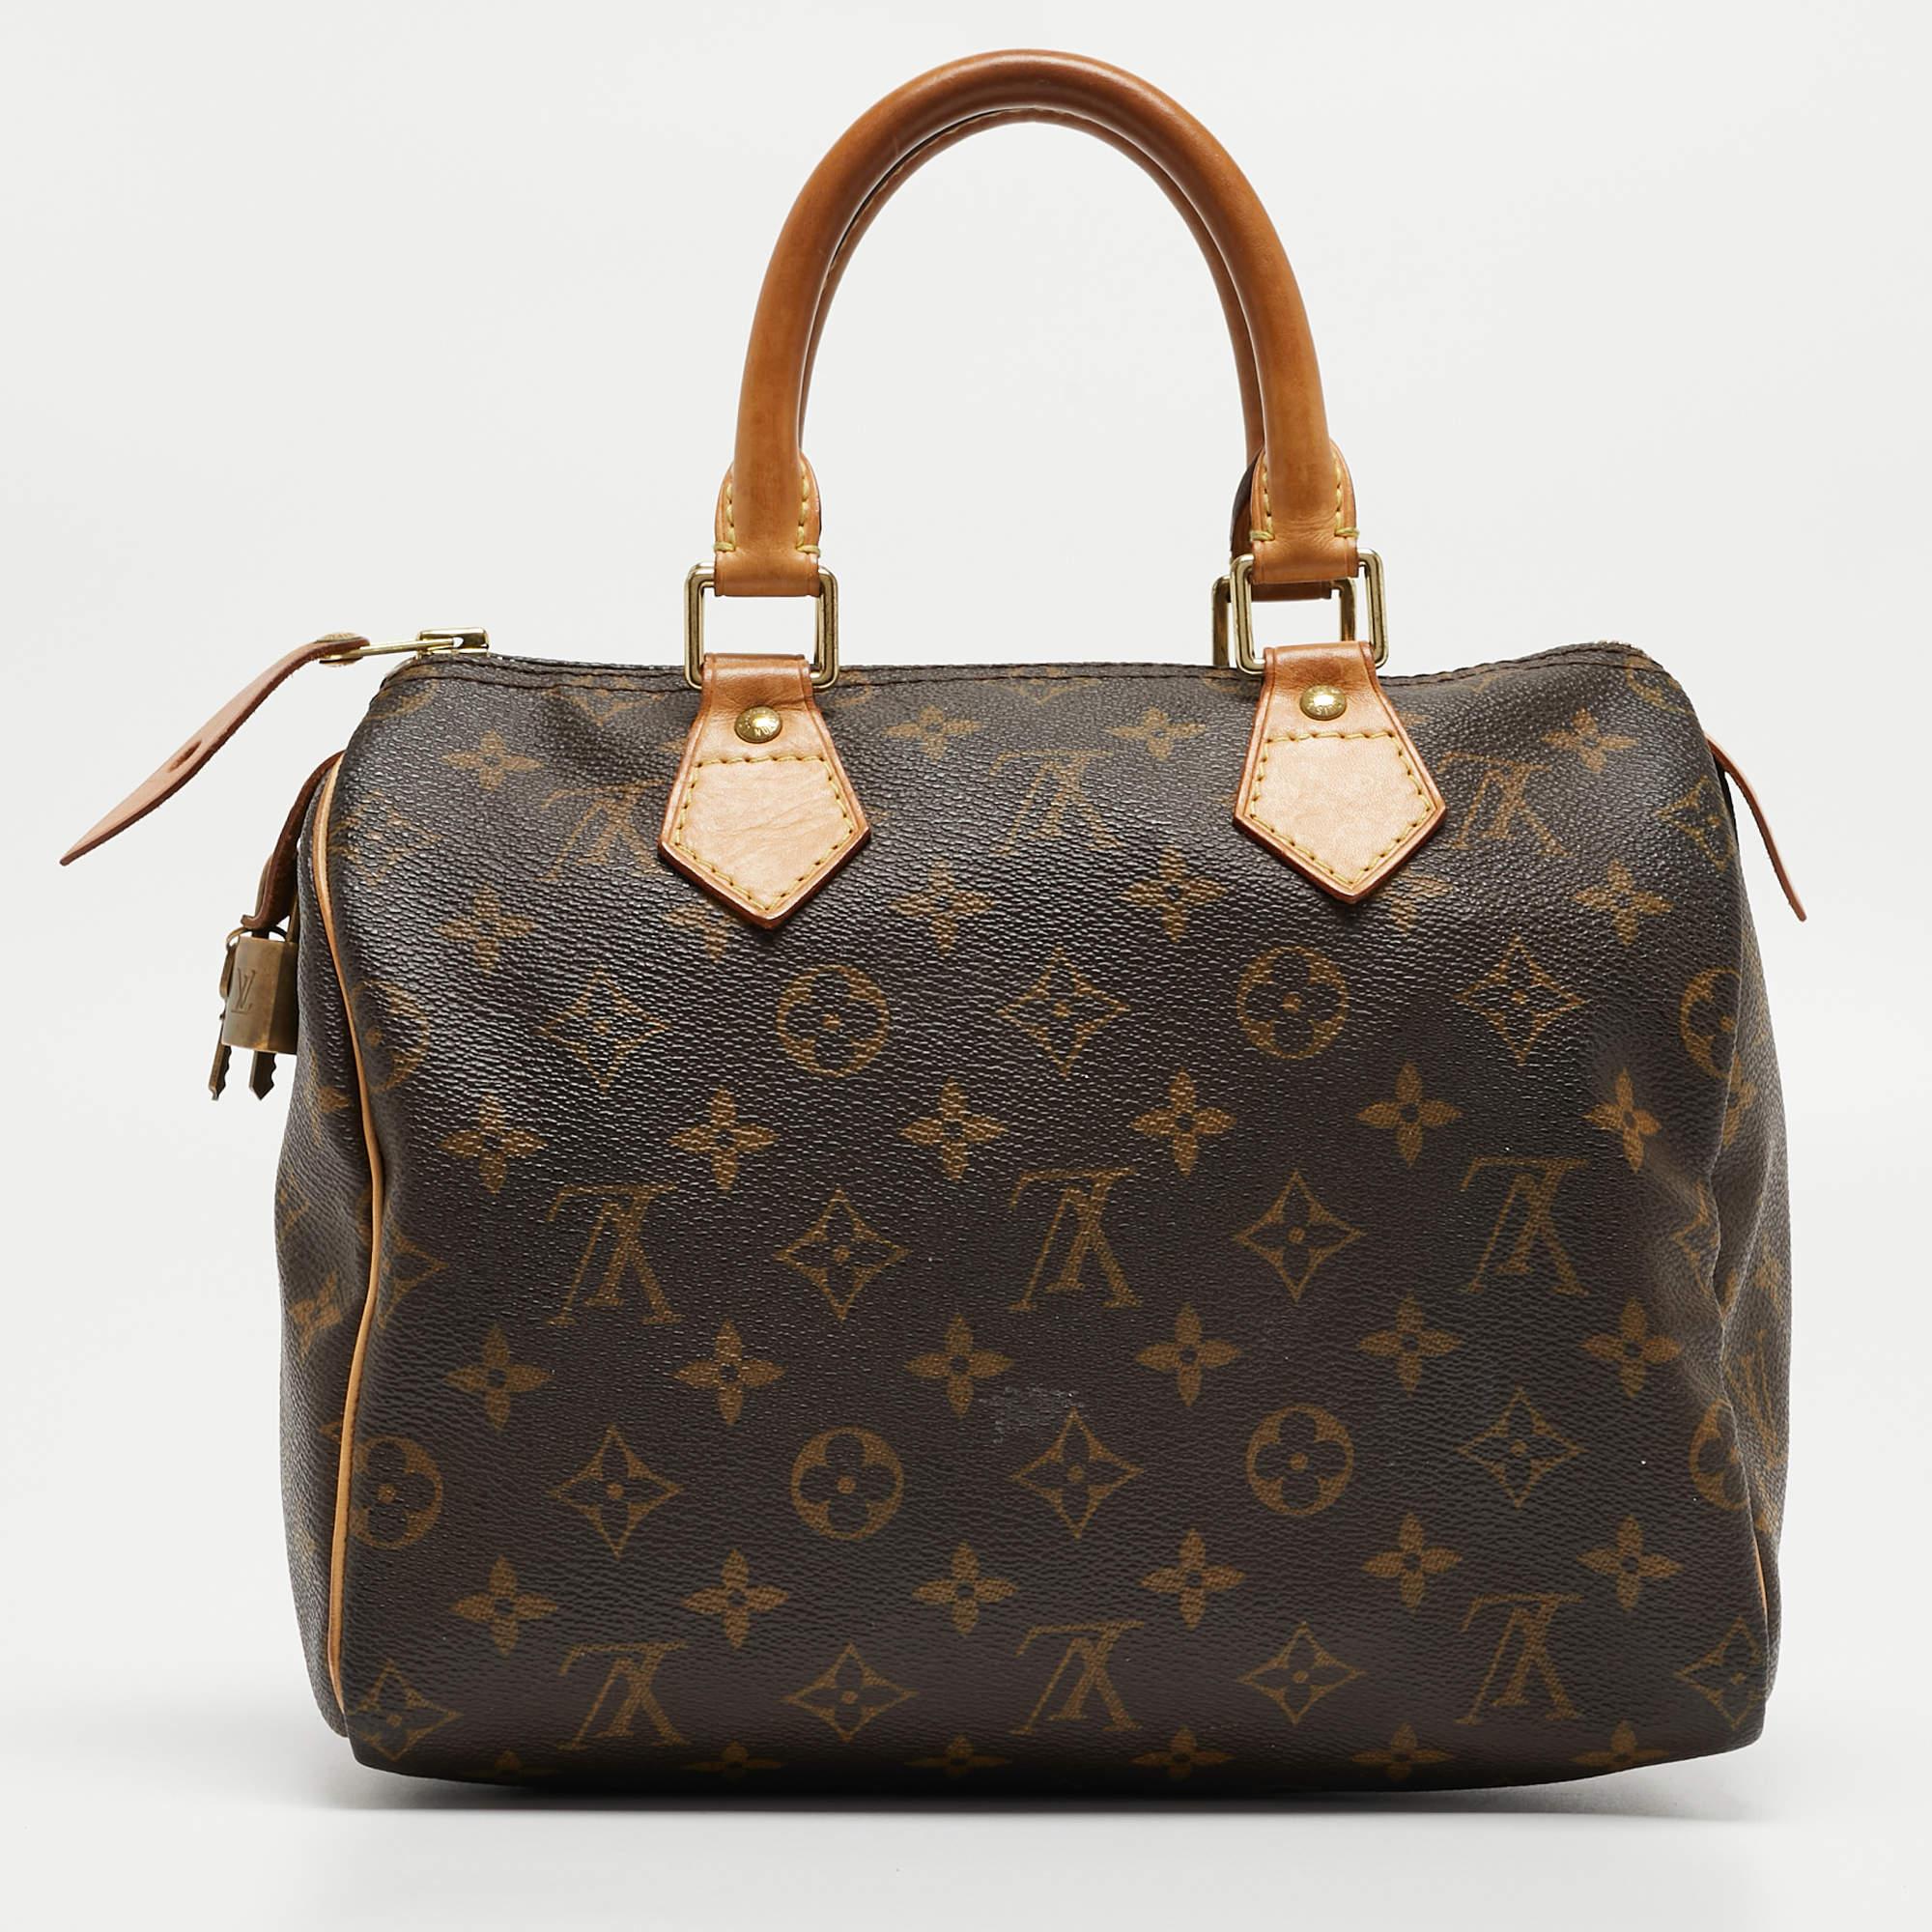 The Louis Vuitton Speedy 25 Bag exudes timeless elegance with its iconic monogram print on durable canvas. Its compact size makes it perfect for everyday use, while the luxurious leather trim and gold-tone hardware add a touch of